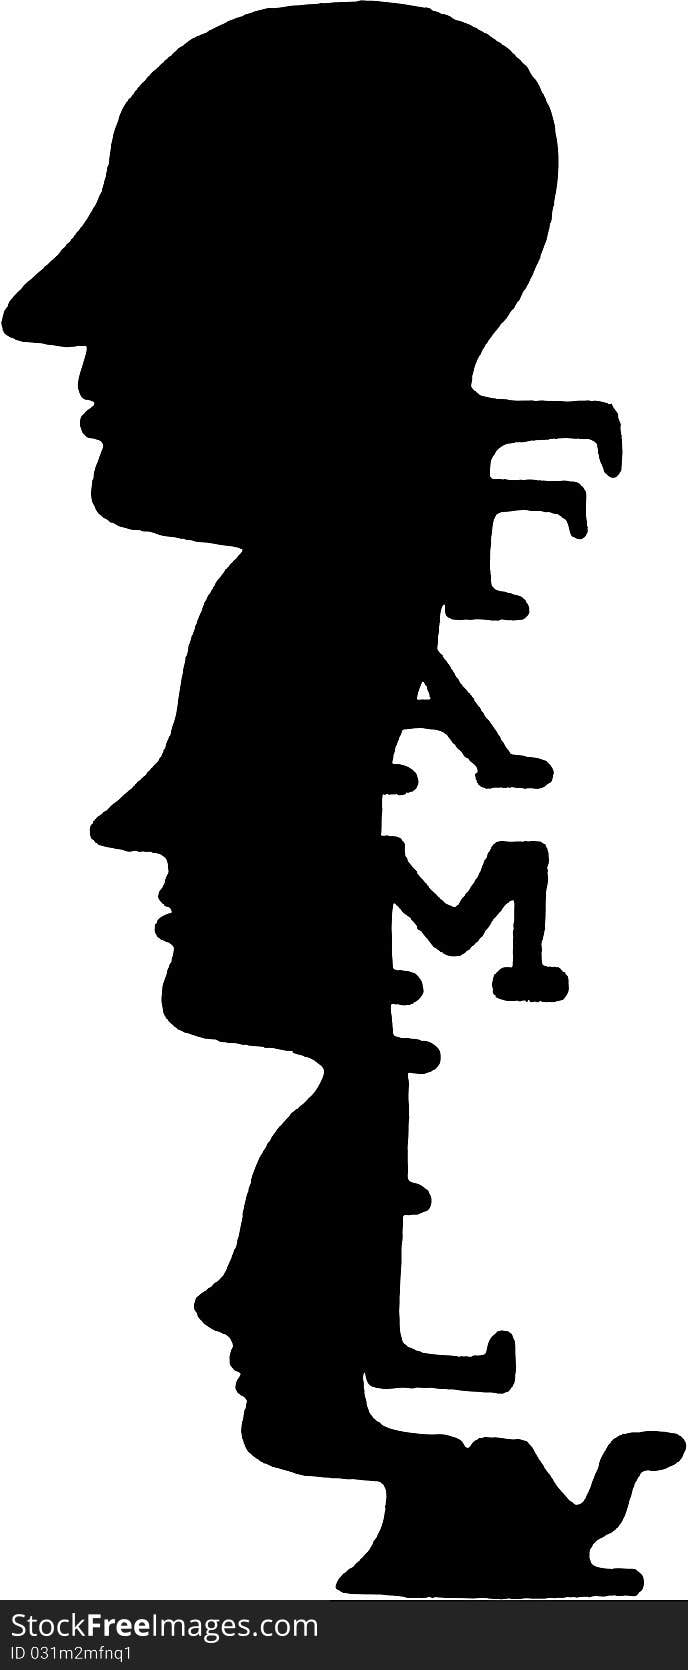 Abstract black family heads vector illustration